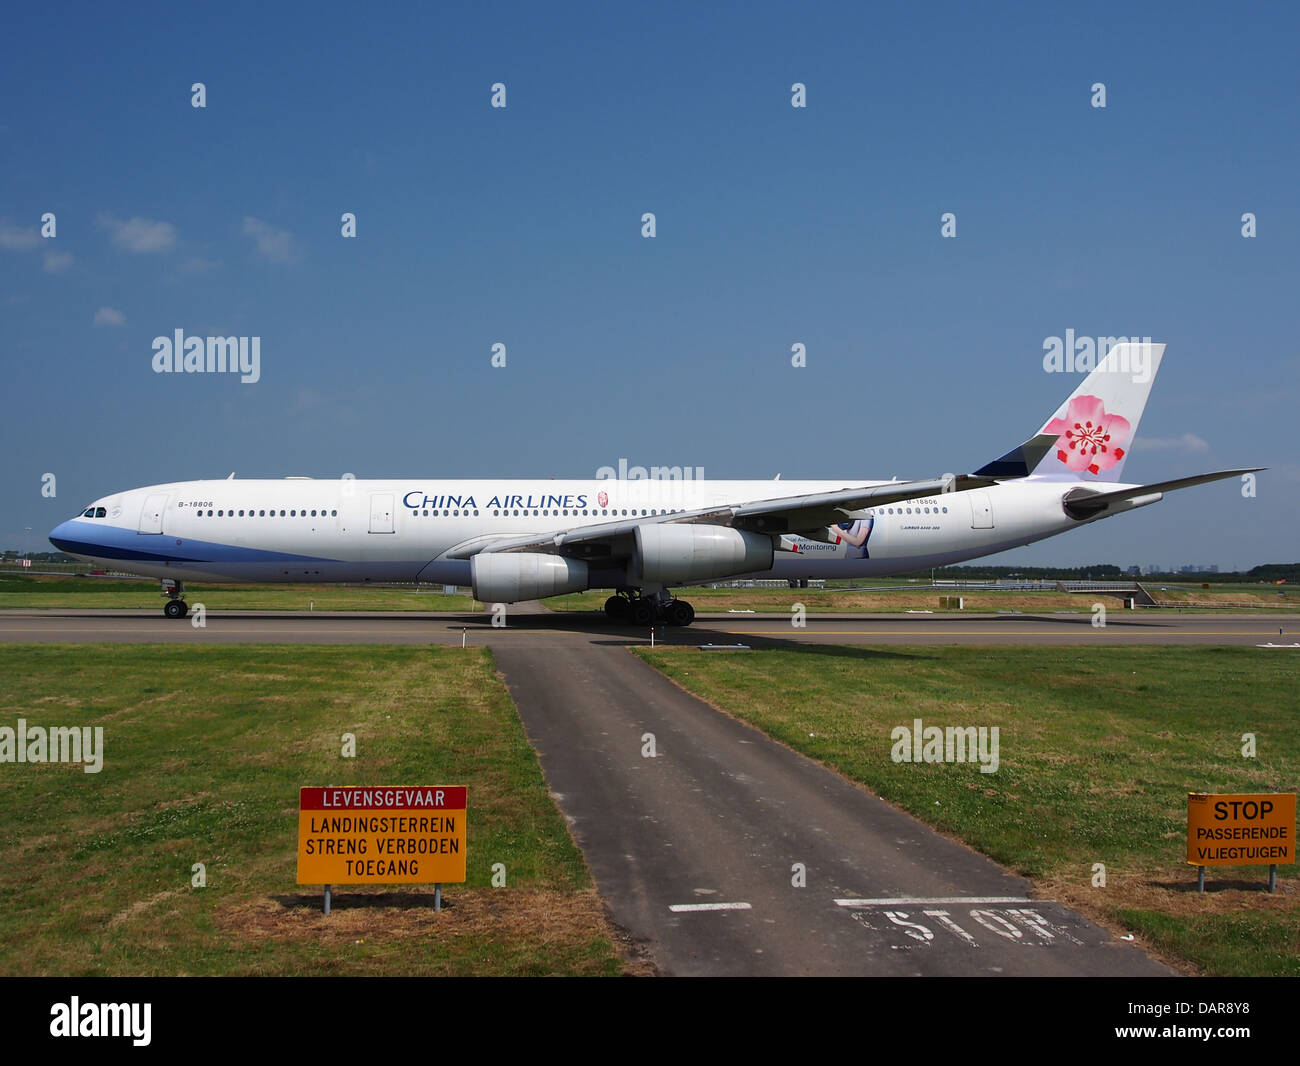 B-18806 China Airlines Airbus A340-313X - cn 433 4 Stock Photo